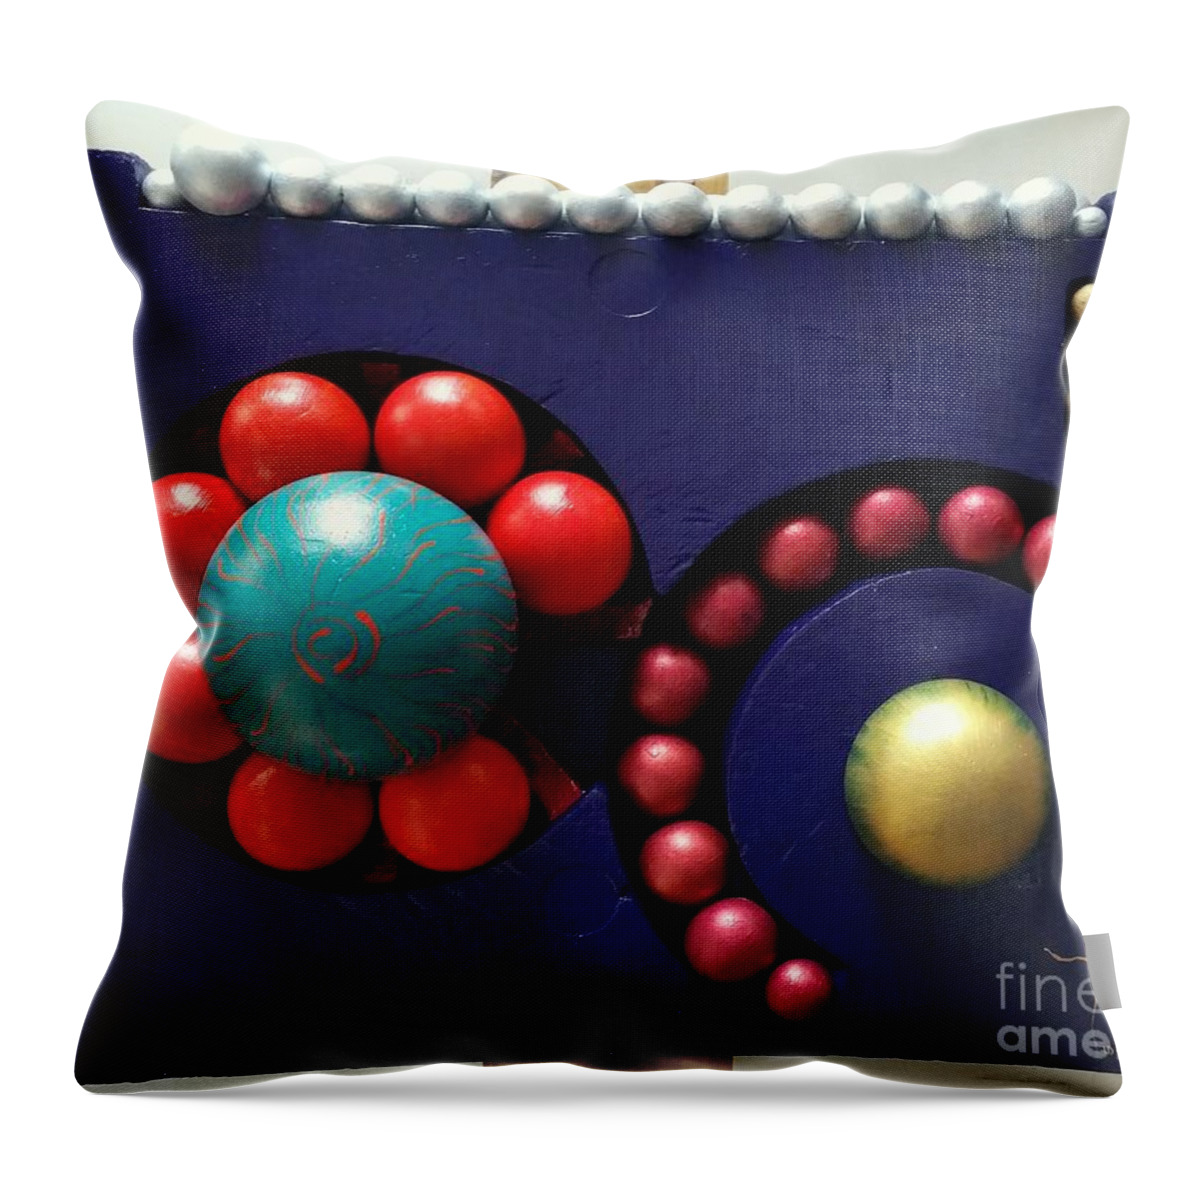  Throw Pillow featuring the painting M O D A Garden by James Lanigan Thompson MFA